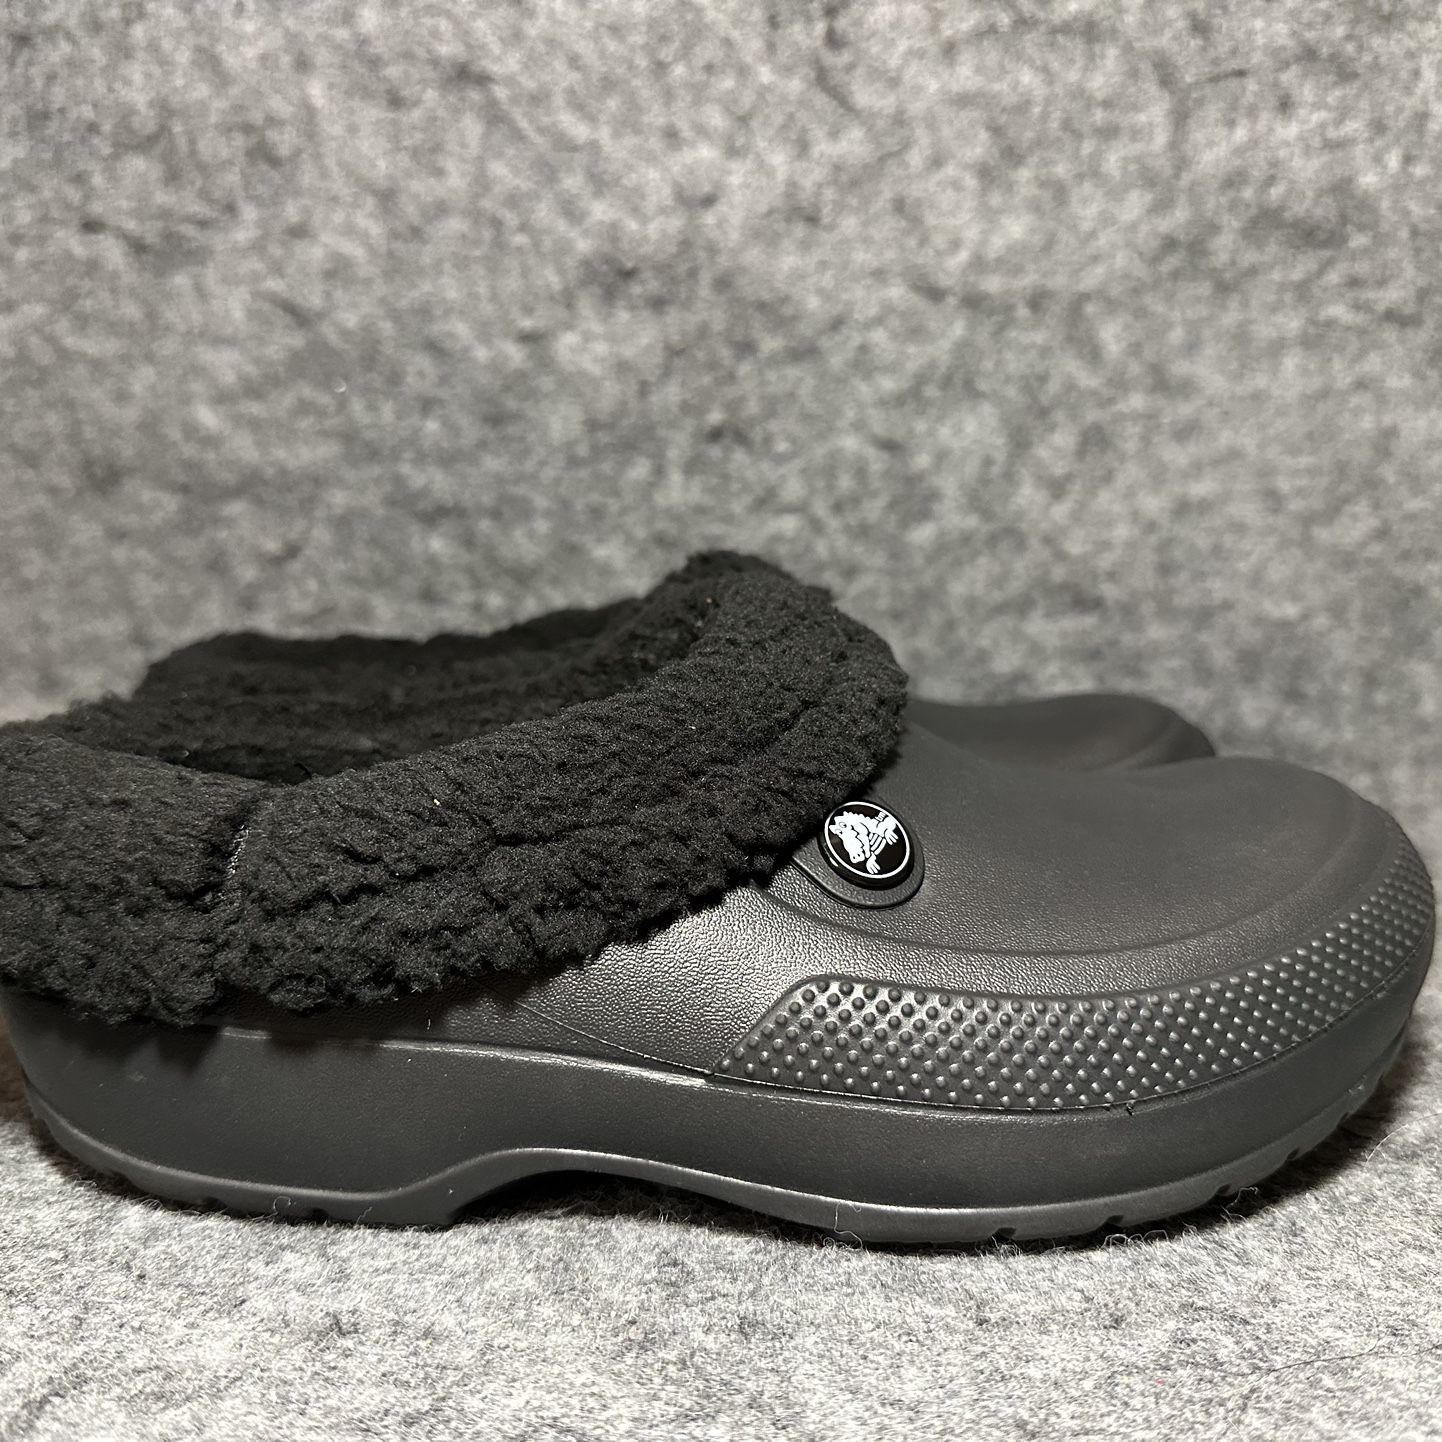 Crocs Classic iii Clogs Slippers #204563 for Sale in Antonio, TX - OfferUp